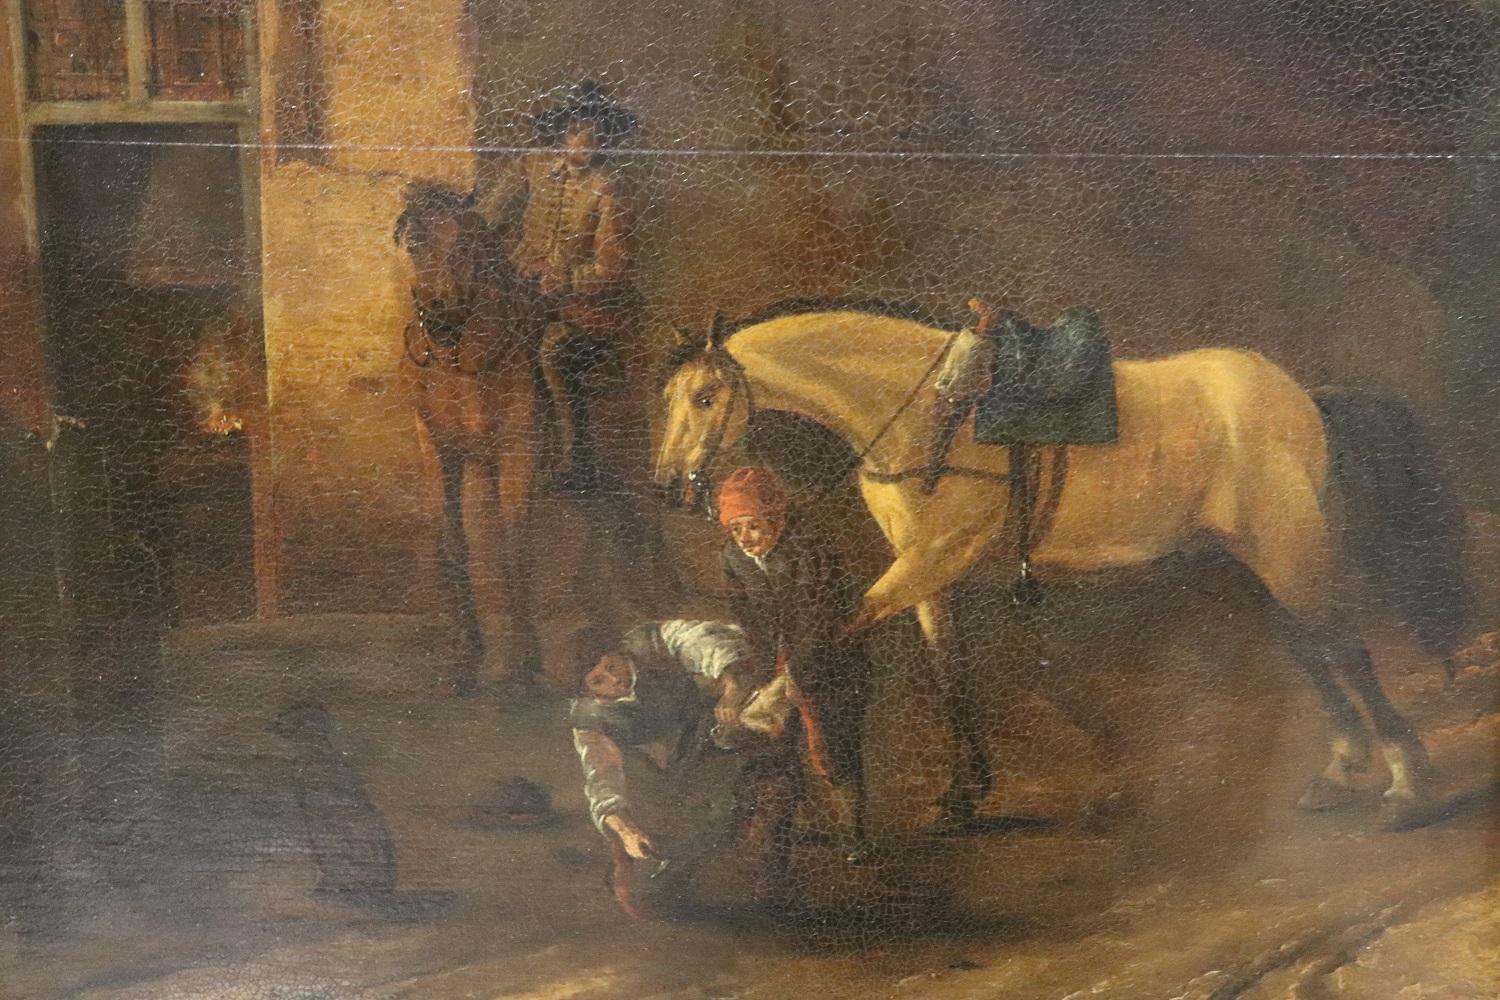 Beautiful antique oil painting on wood board. Excellent pictorial quality. Flemish school of the 17th century. A scene of everyday life in the village where in the foreground a farrier works on the horse's hooves. Not signed. Sold with rare antique